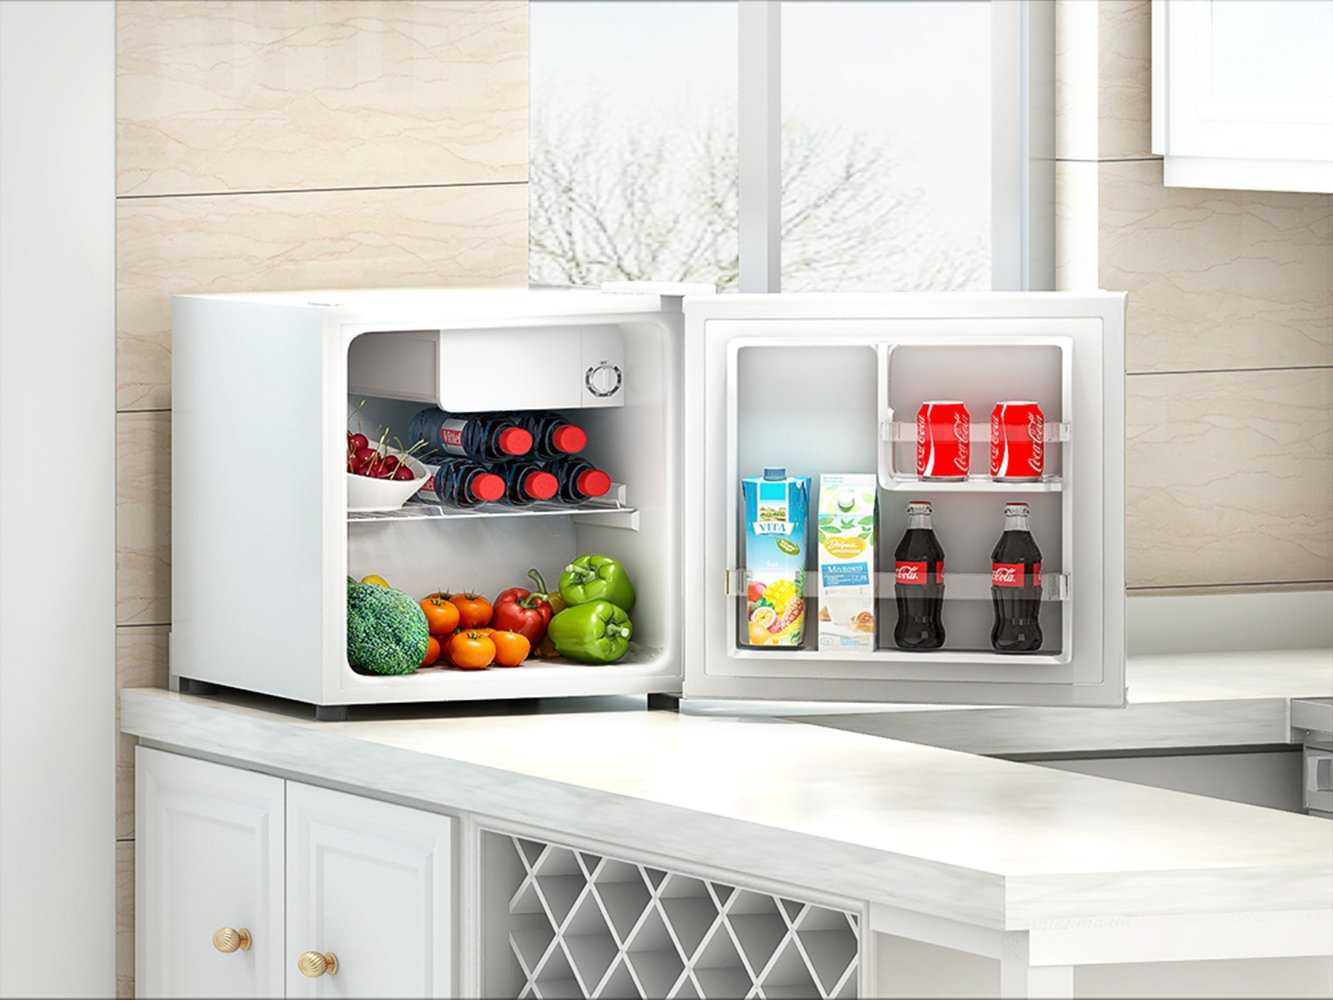 Refrigerator Ice with products